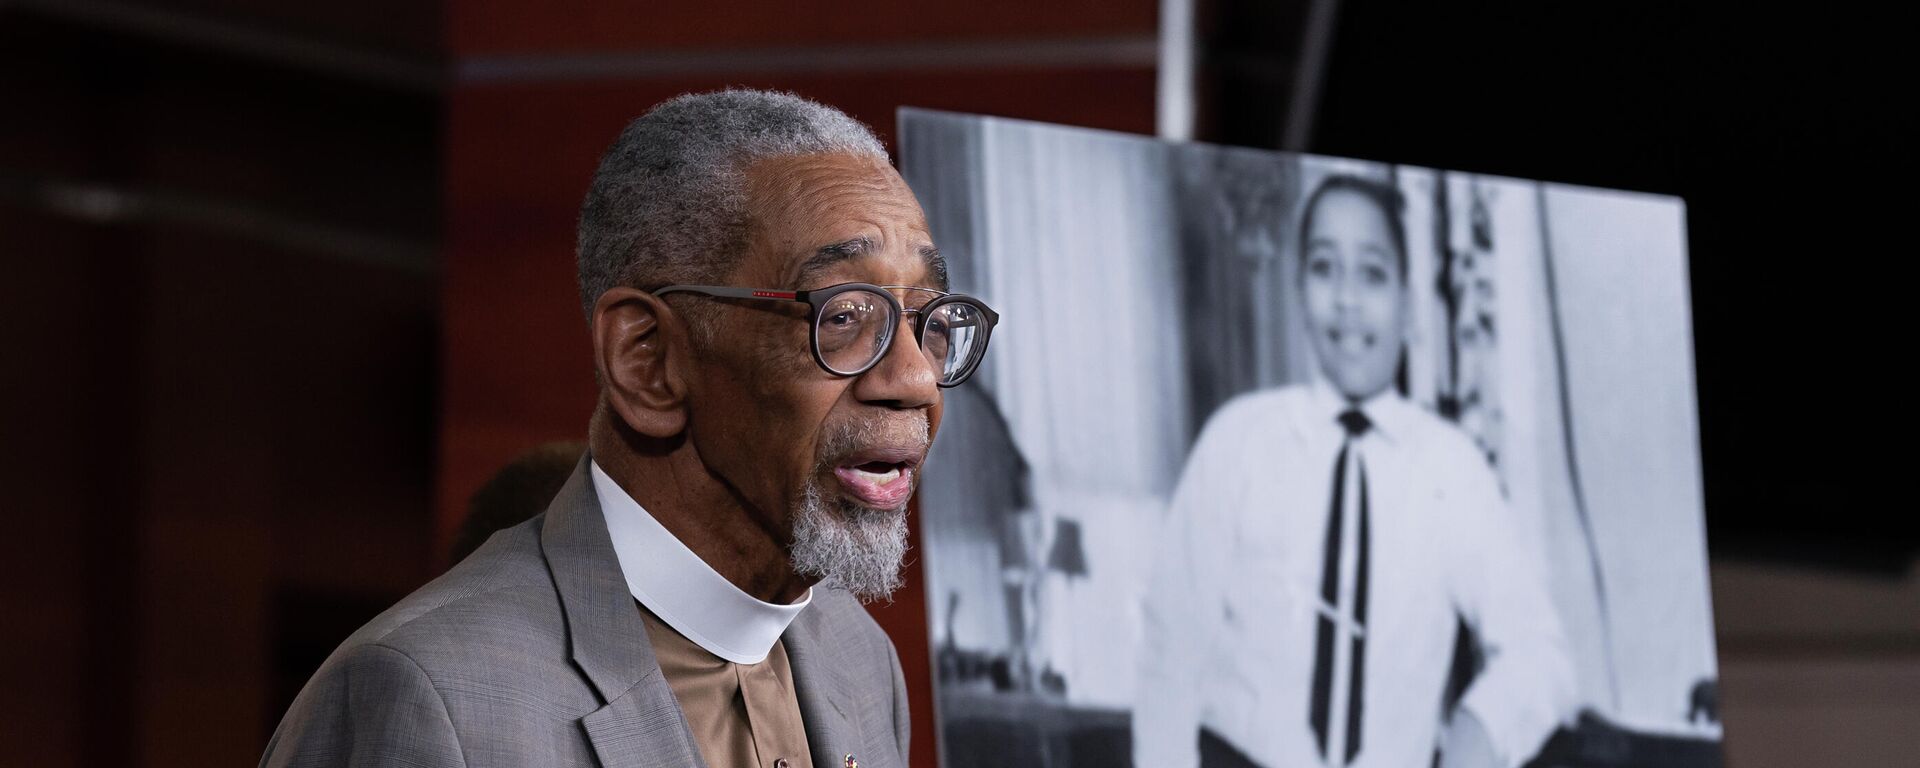 Rep. Bobby Rush, D-Ill., speaks during a news conference about the Emmett Till Anti-Lynching Act on Capitol Hill in Washington, on Feb. 26, 2020. Emmett Till, pictured at right, was a 14-year-old African-American who was lynched in Mississippi in 1955, after being accused of offending a white woman in her family's grocery store. Congress has given final approval to legislation that for the first time would make lynching a federal hate crime in the U.S. - Sputnik International, 1920, 11.03.2022